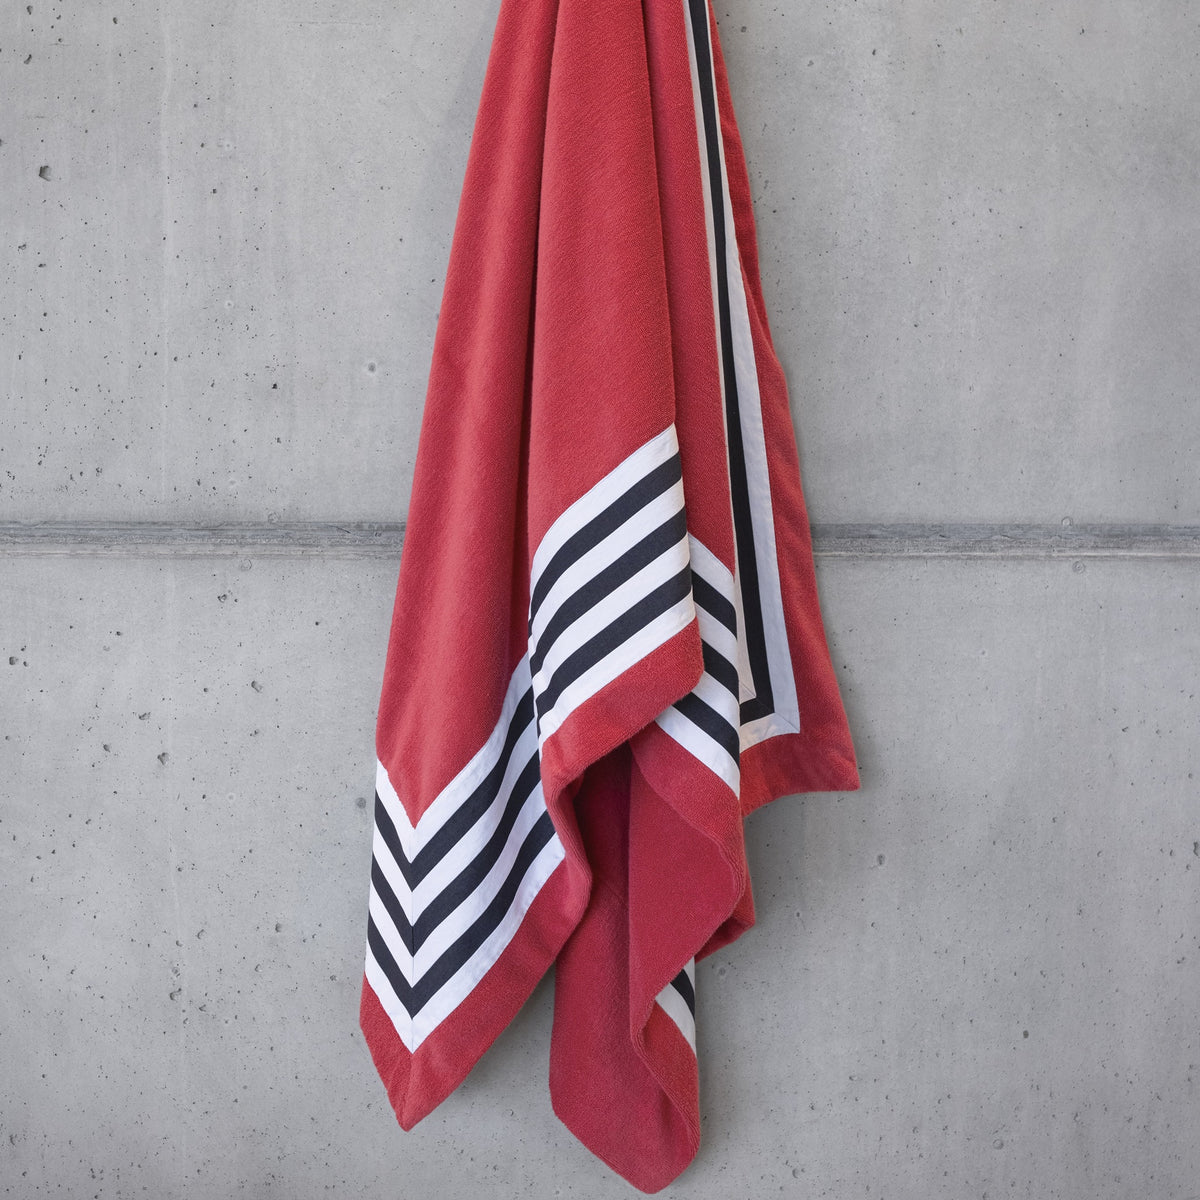 Viva Magenta Abyss Cannes Beach Towels Hung on the Wall